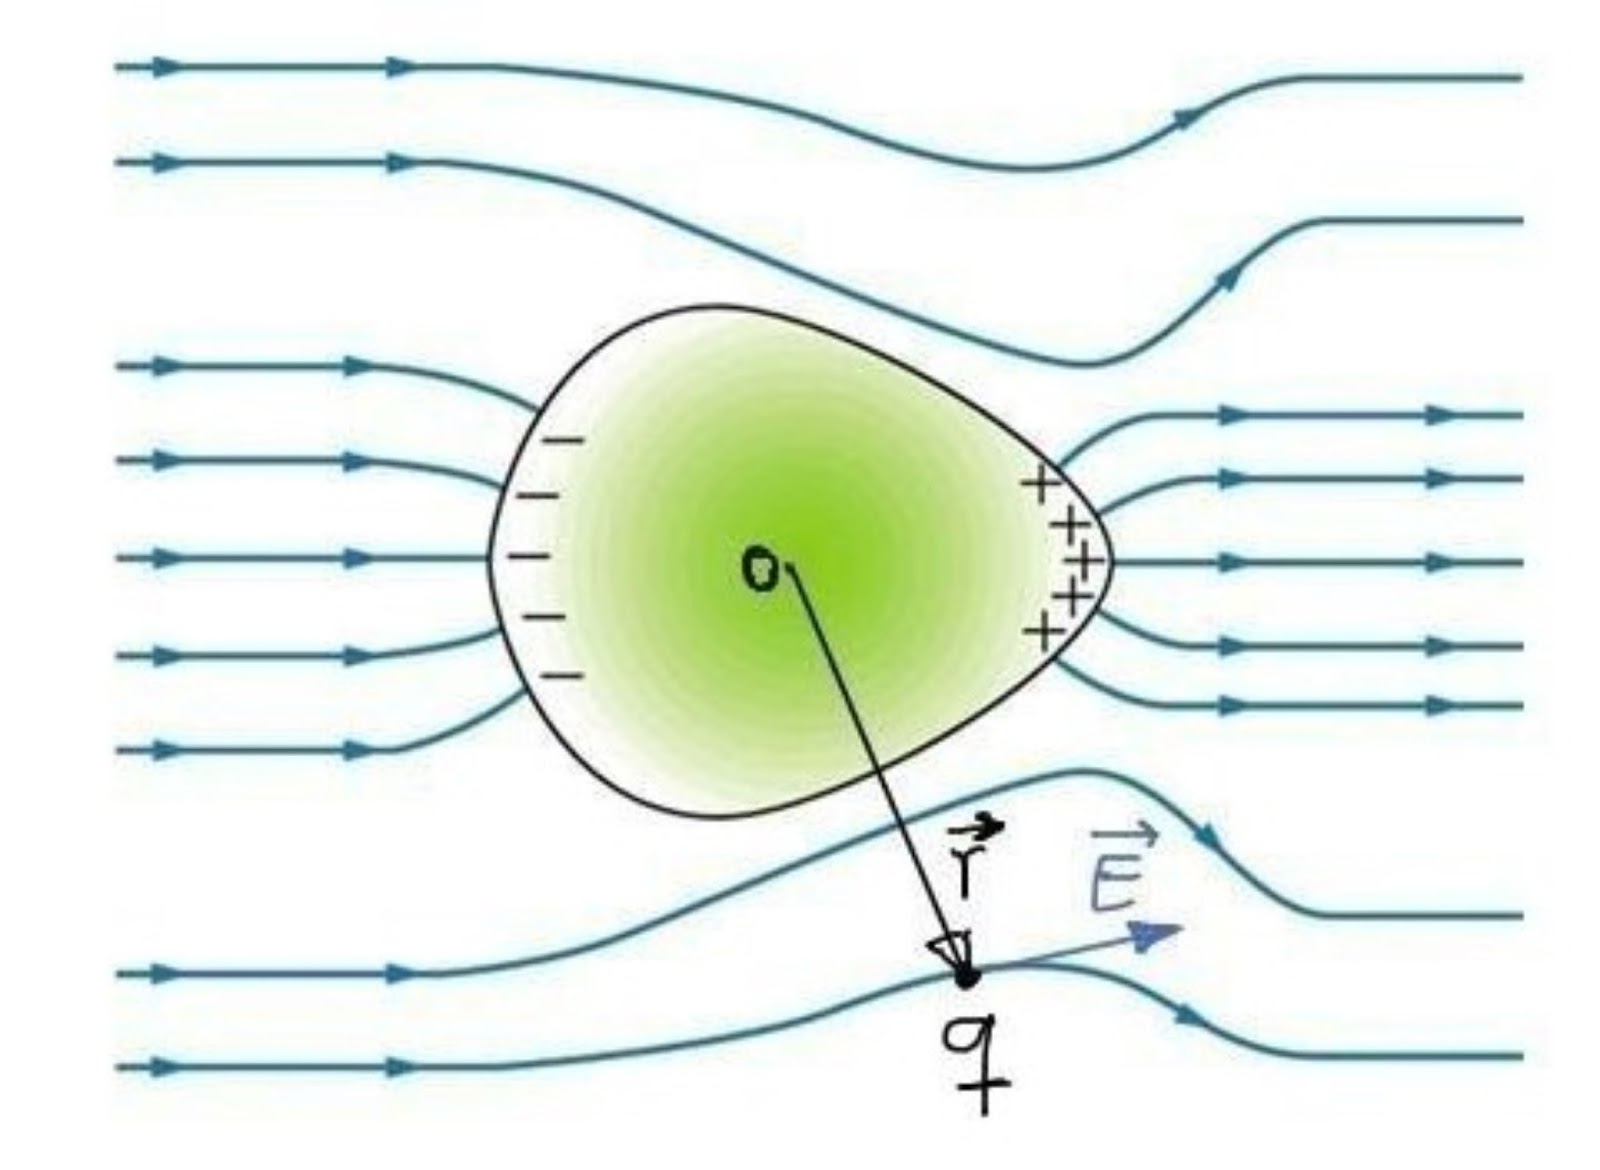 Physics 12: Electrostatics: Coulomb's Law, Electric Field, and Electric